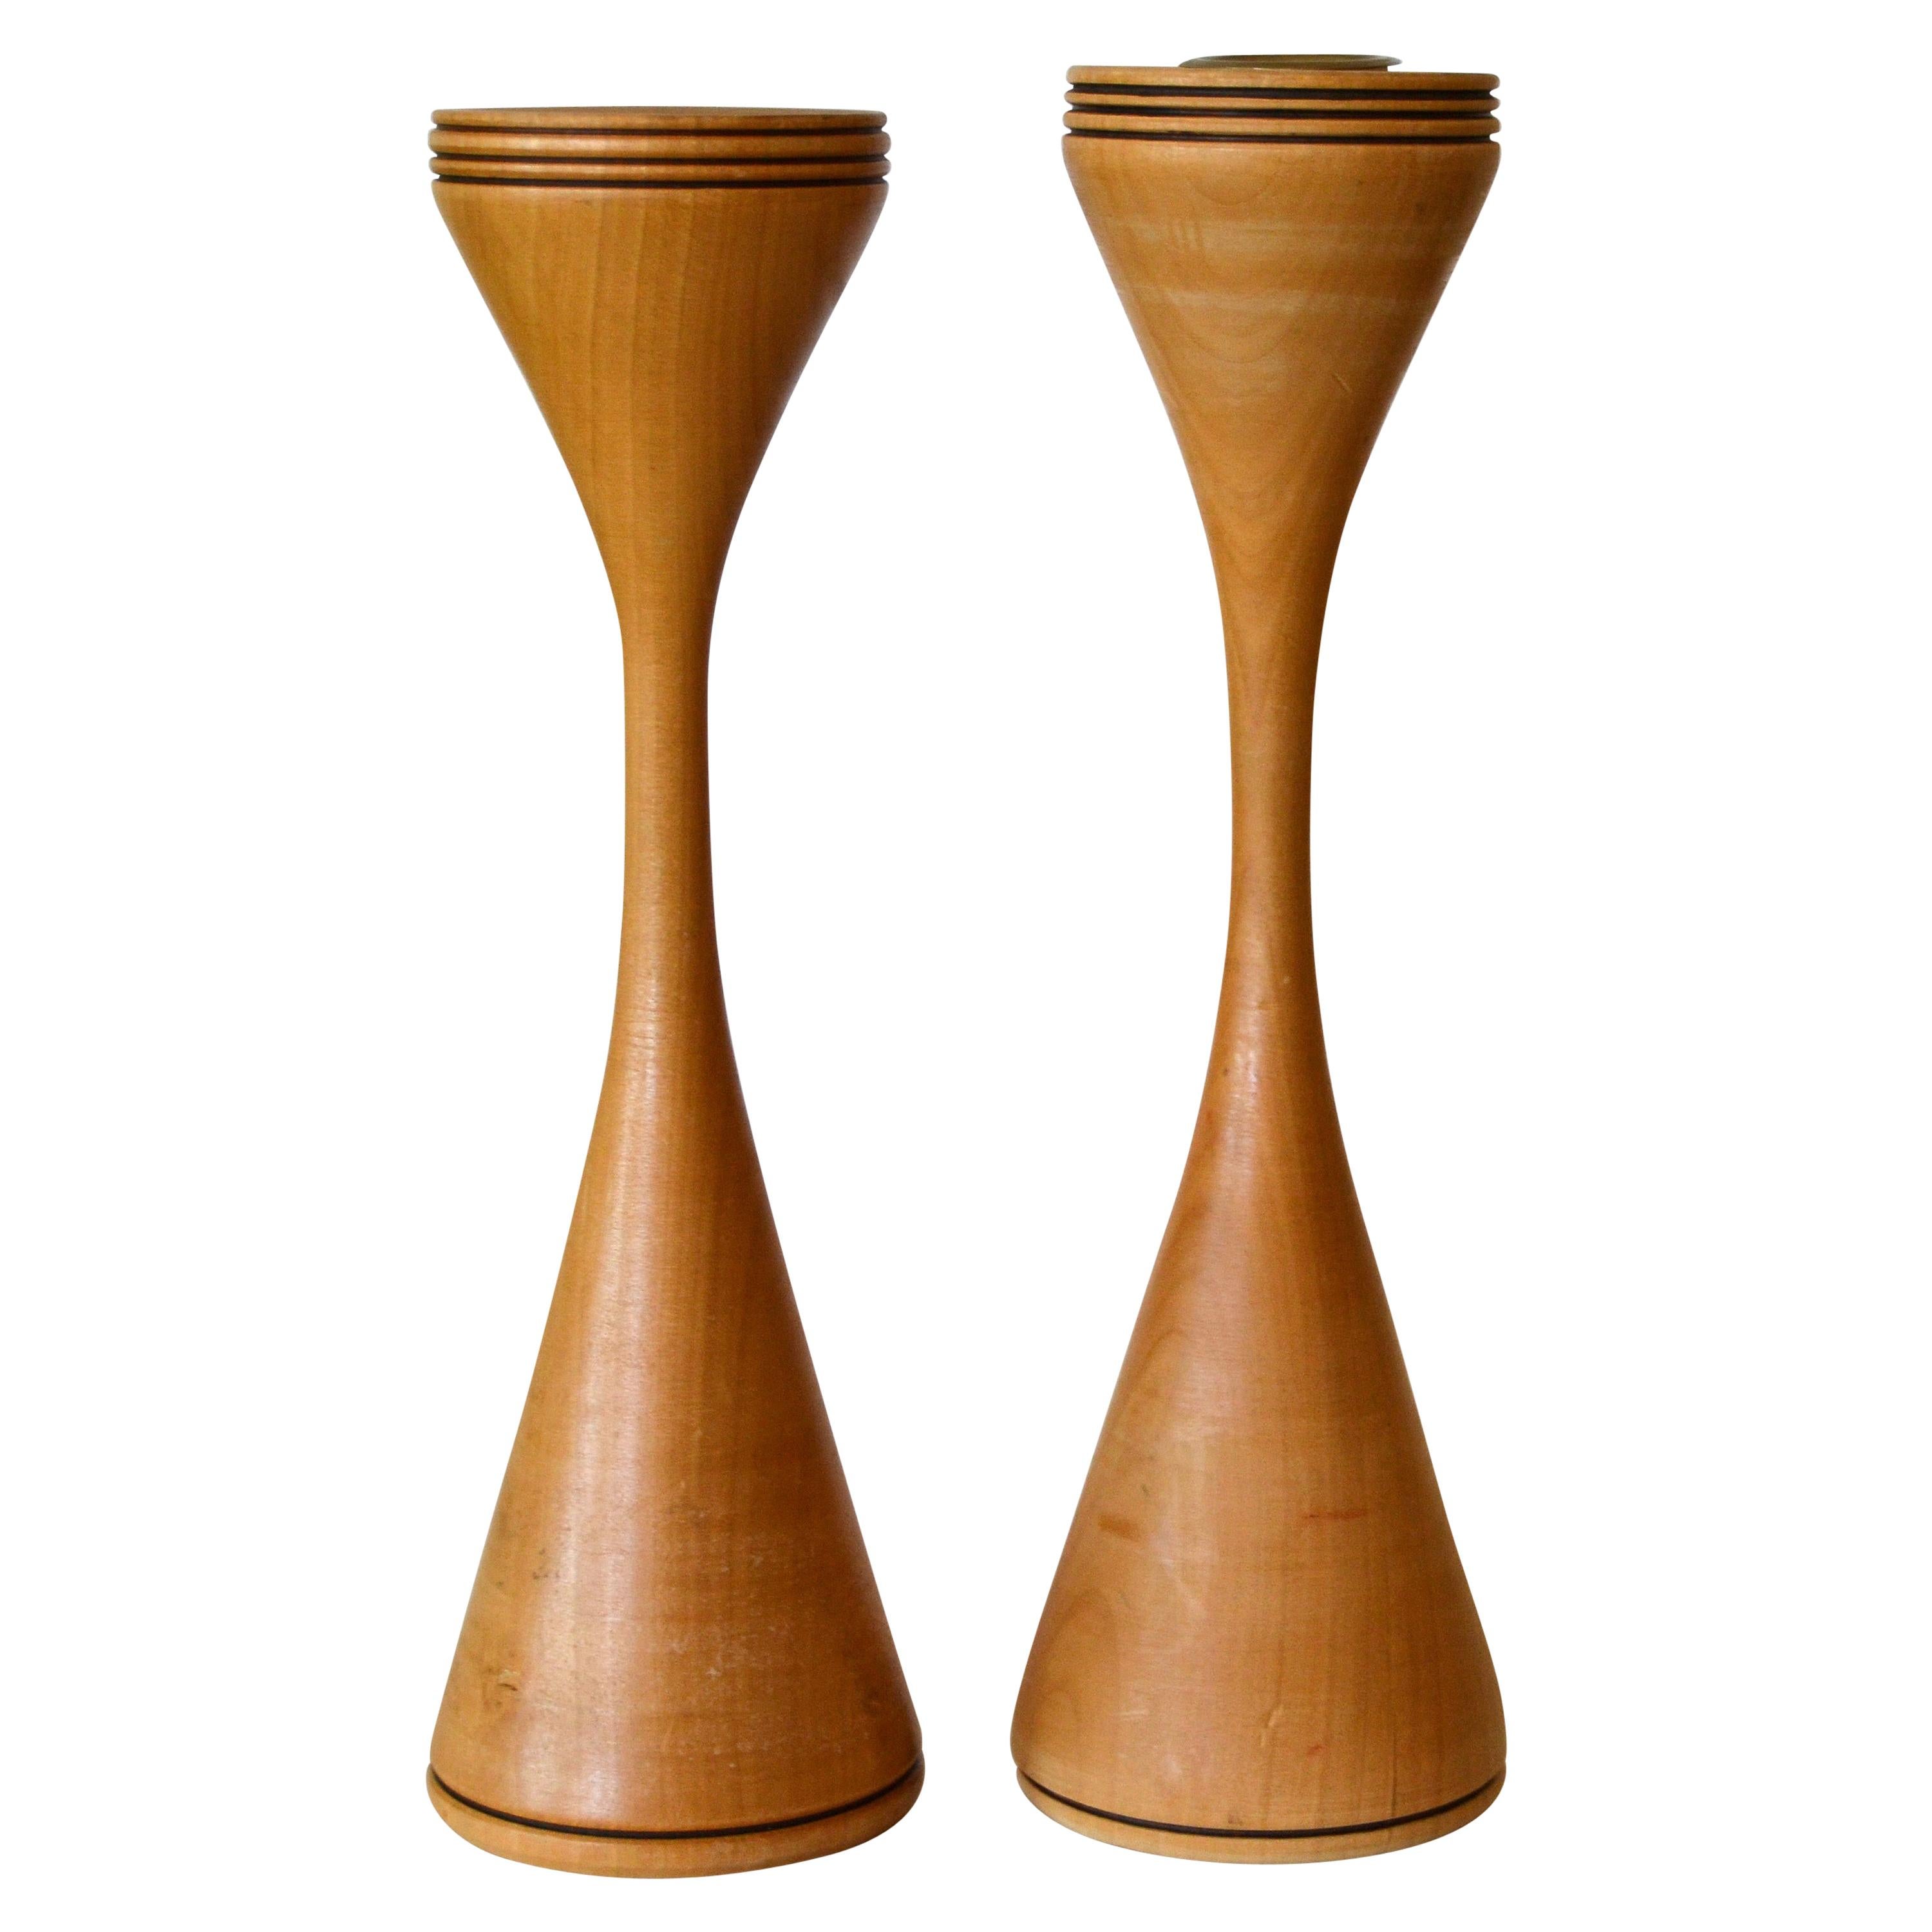 Signed Scandinavian Modern Handcrafted Turned Wood and Brass Candleholders, Pair For Sale